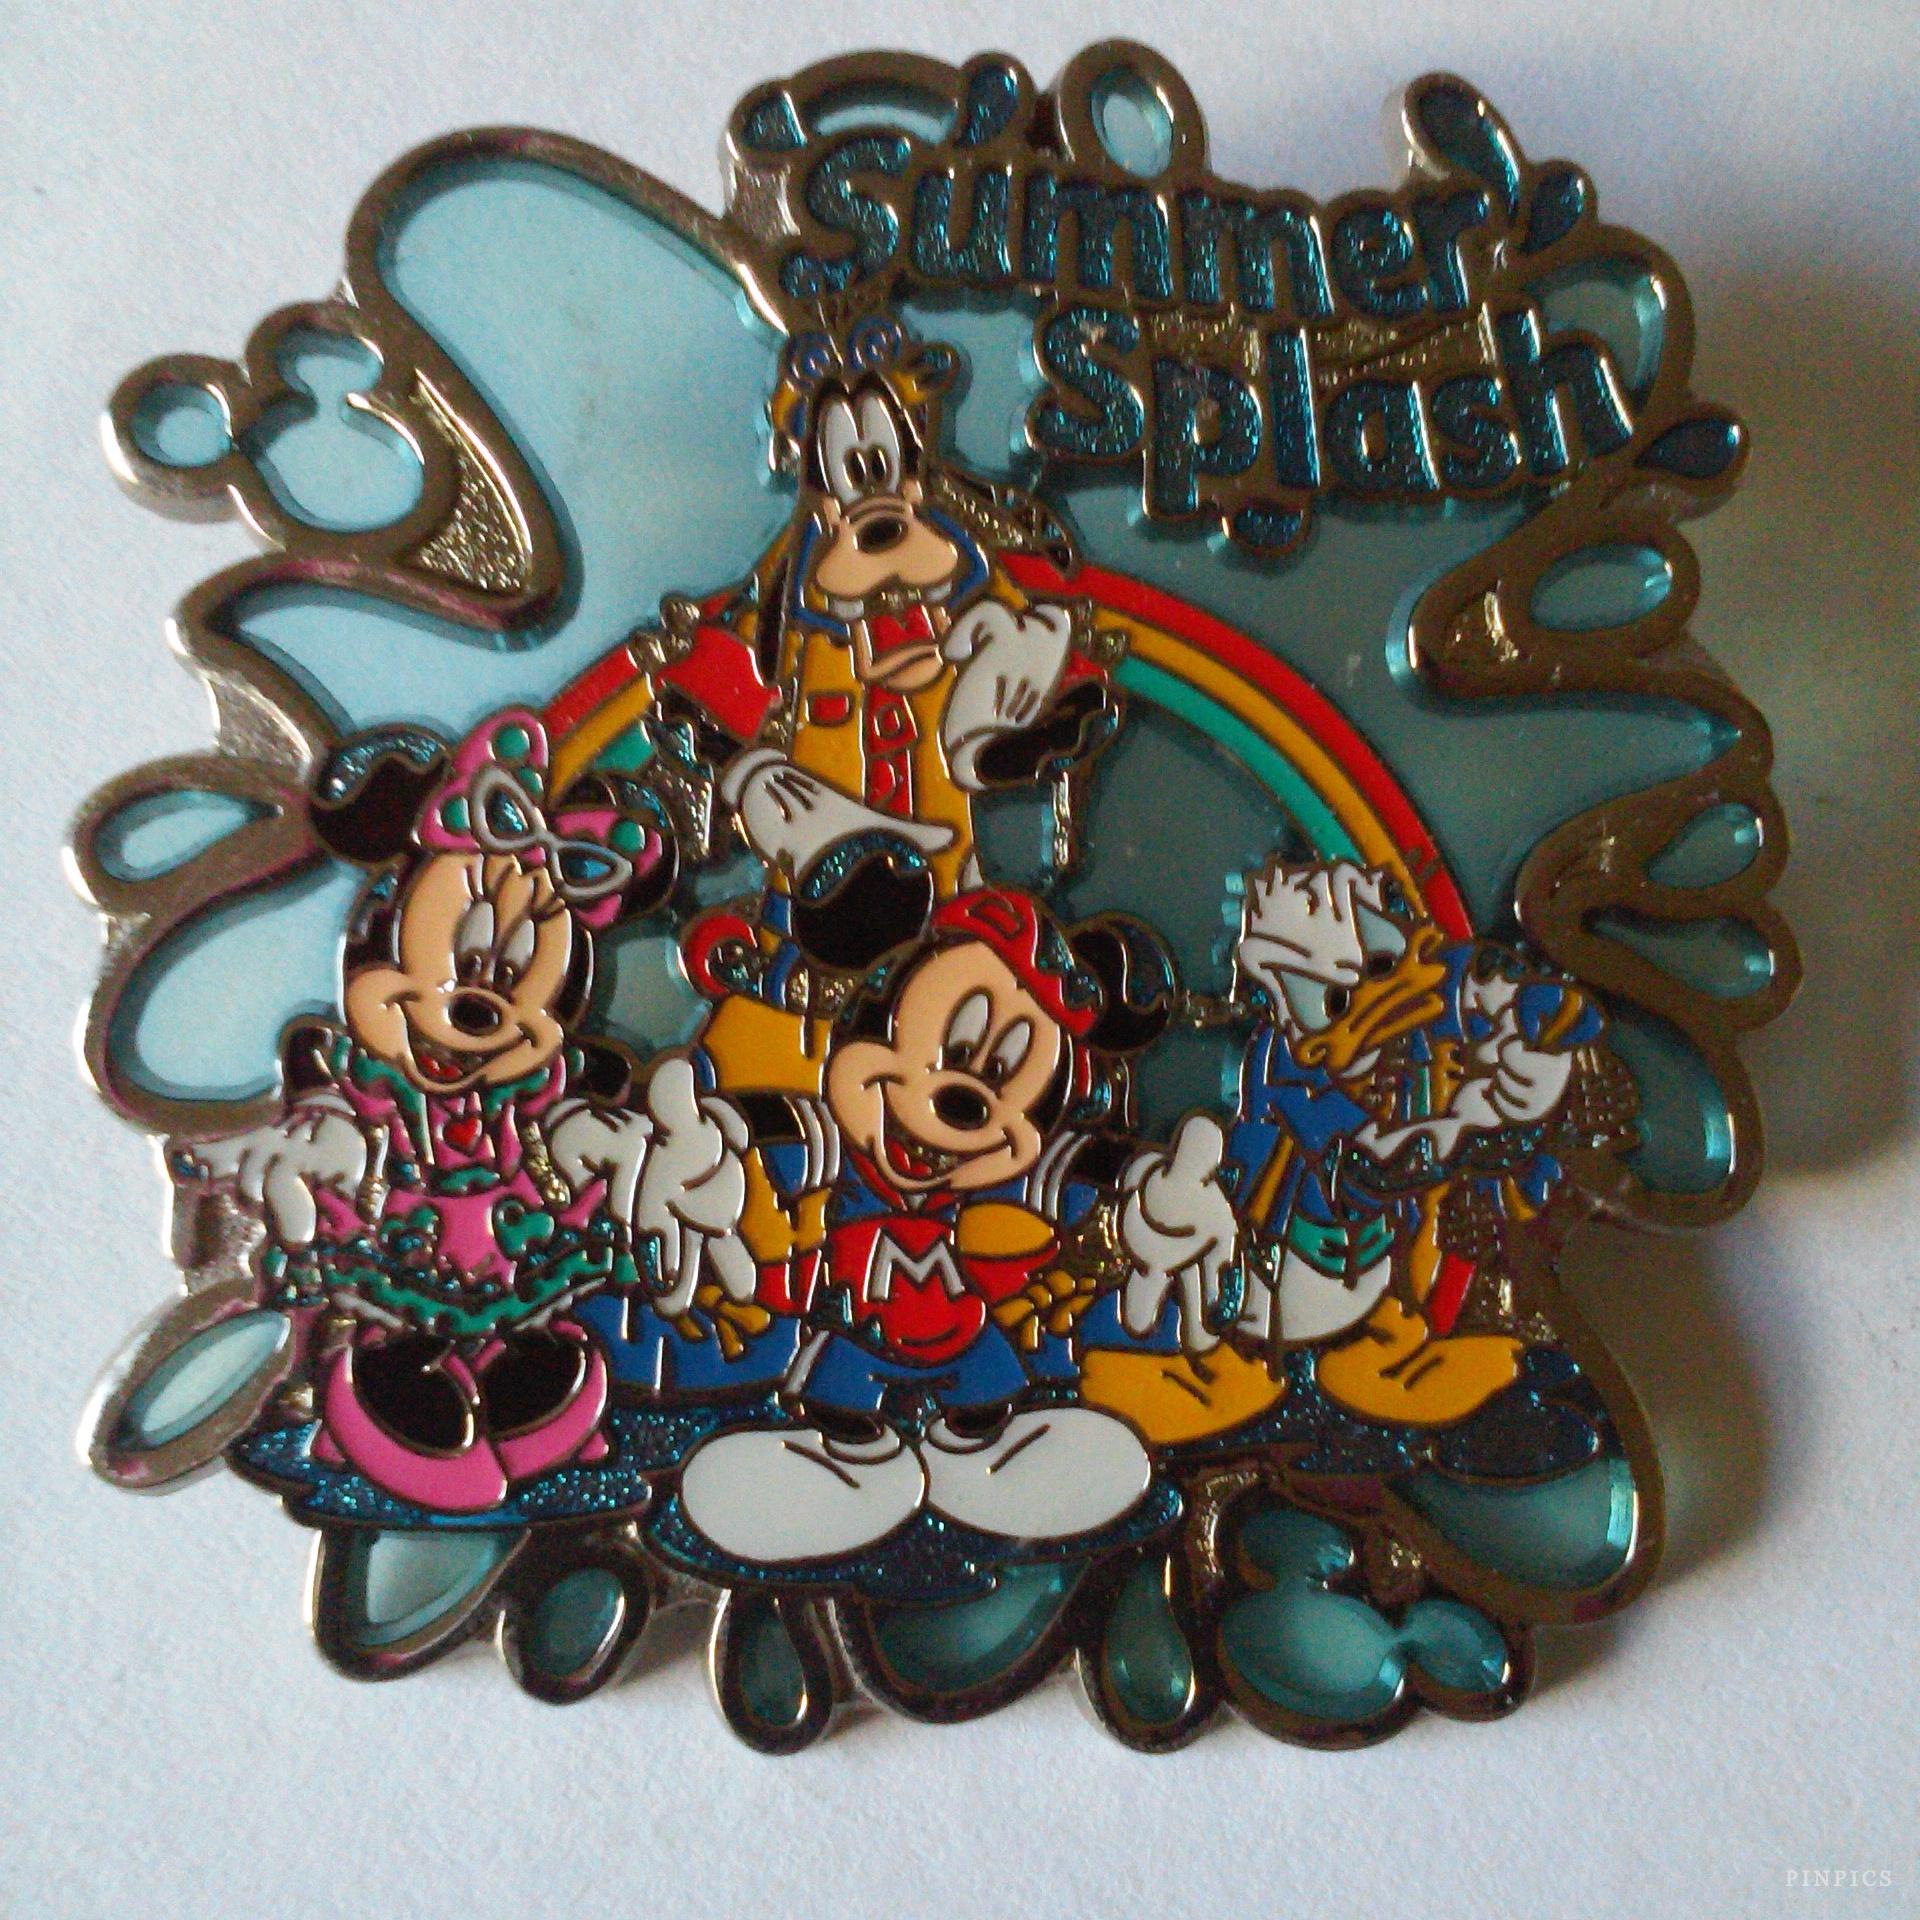 Disney Trading Pin 51633 DLR - Dated 2007 Mickey & Friends Large Pin Bag